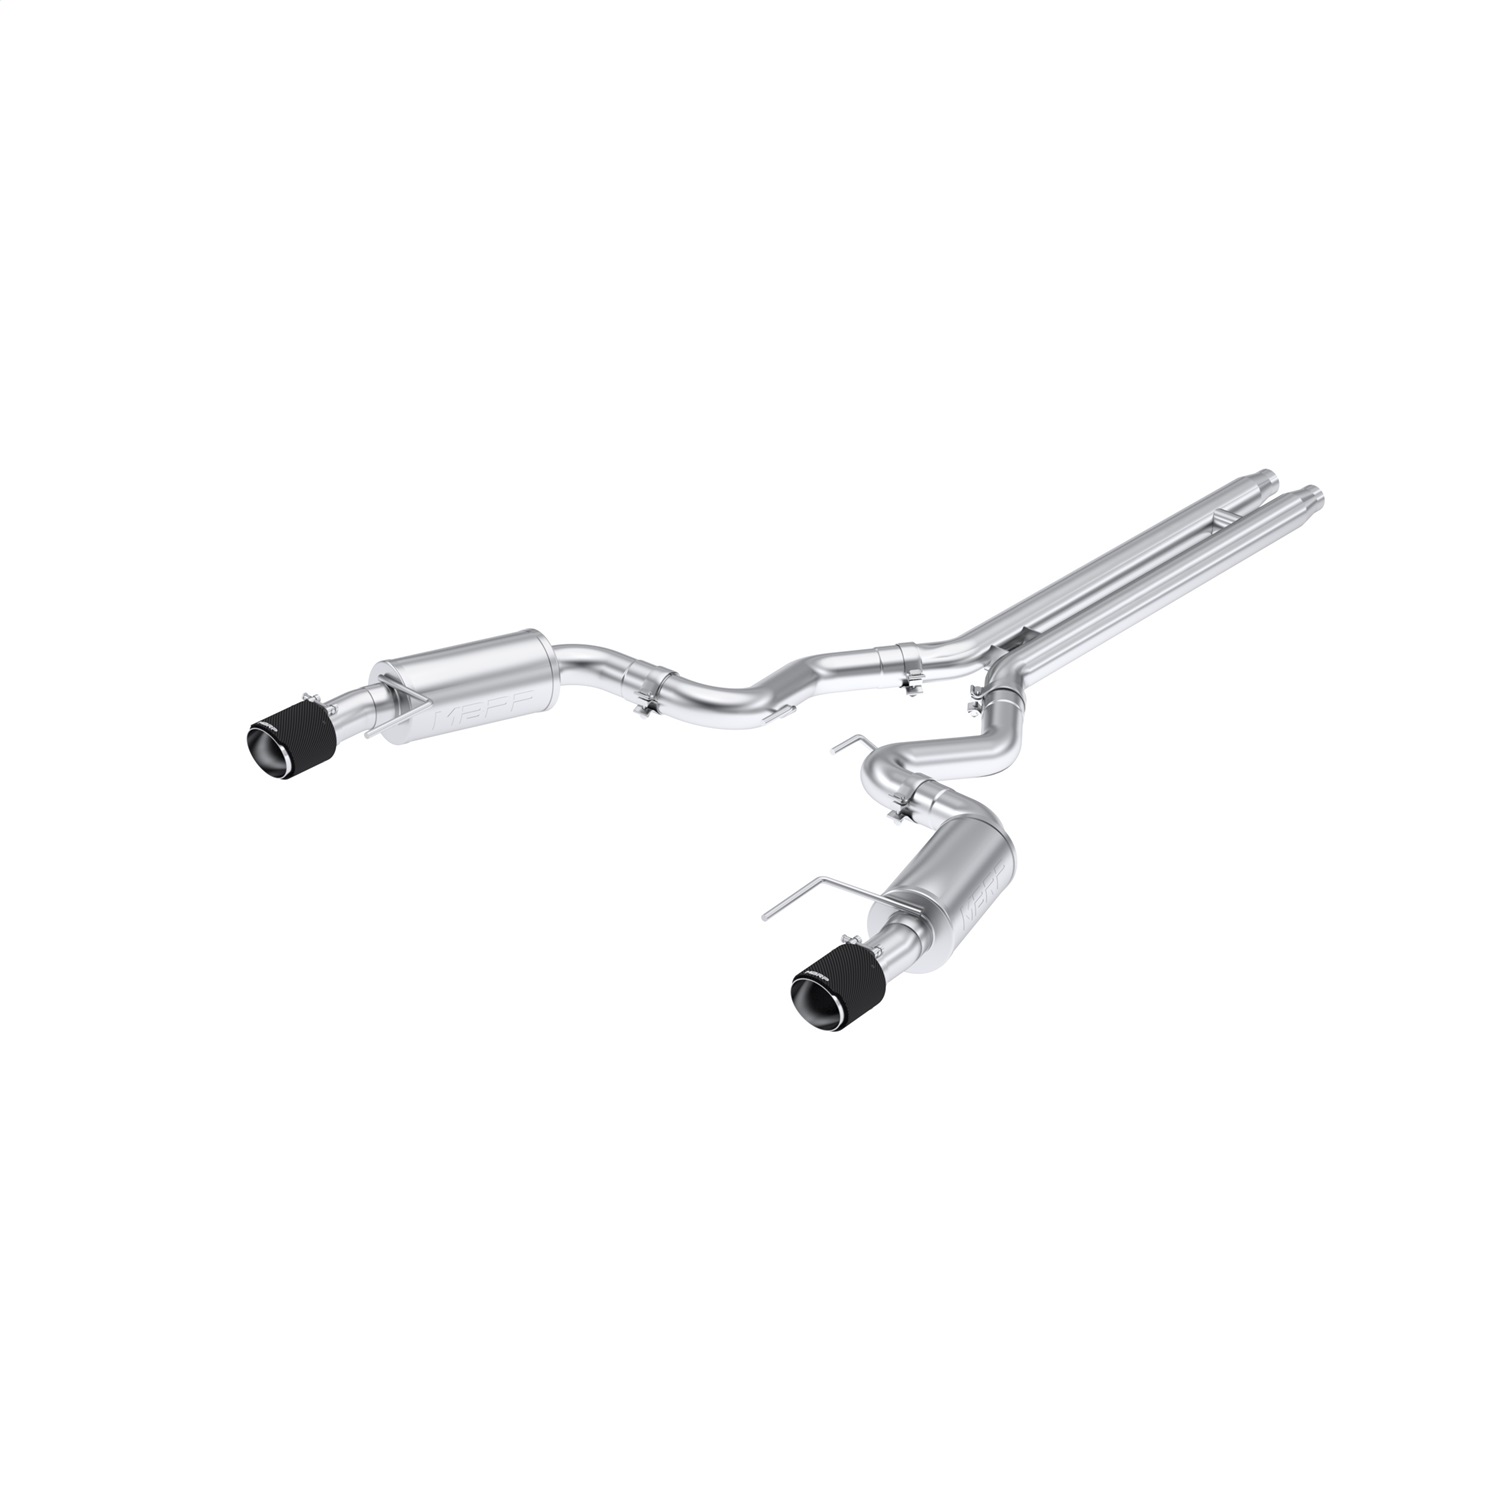 MBRP Exhaust S72513CF Armor Pro Cat Back Exhaust System Fits 24 Mustang